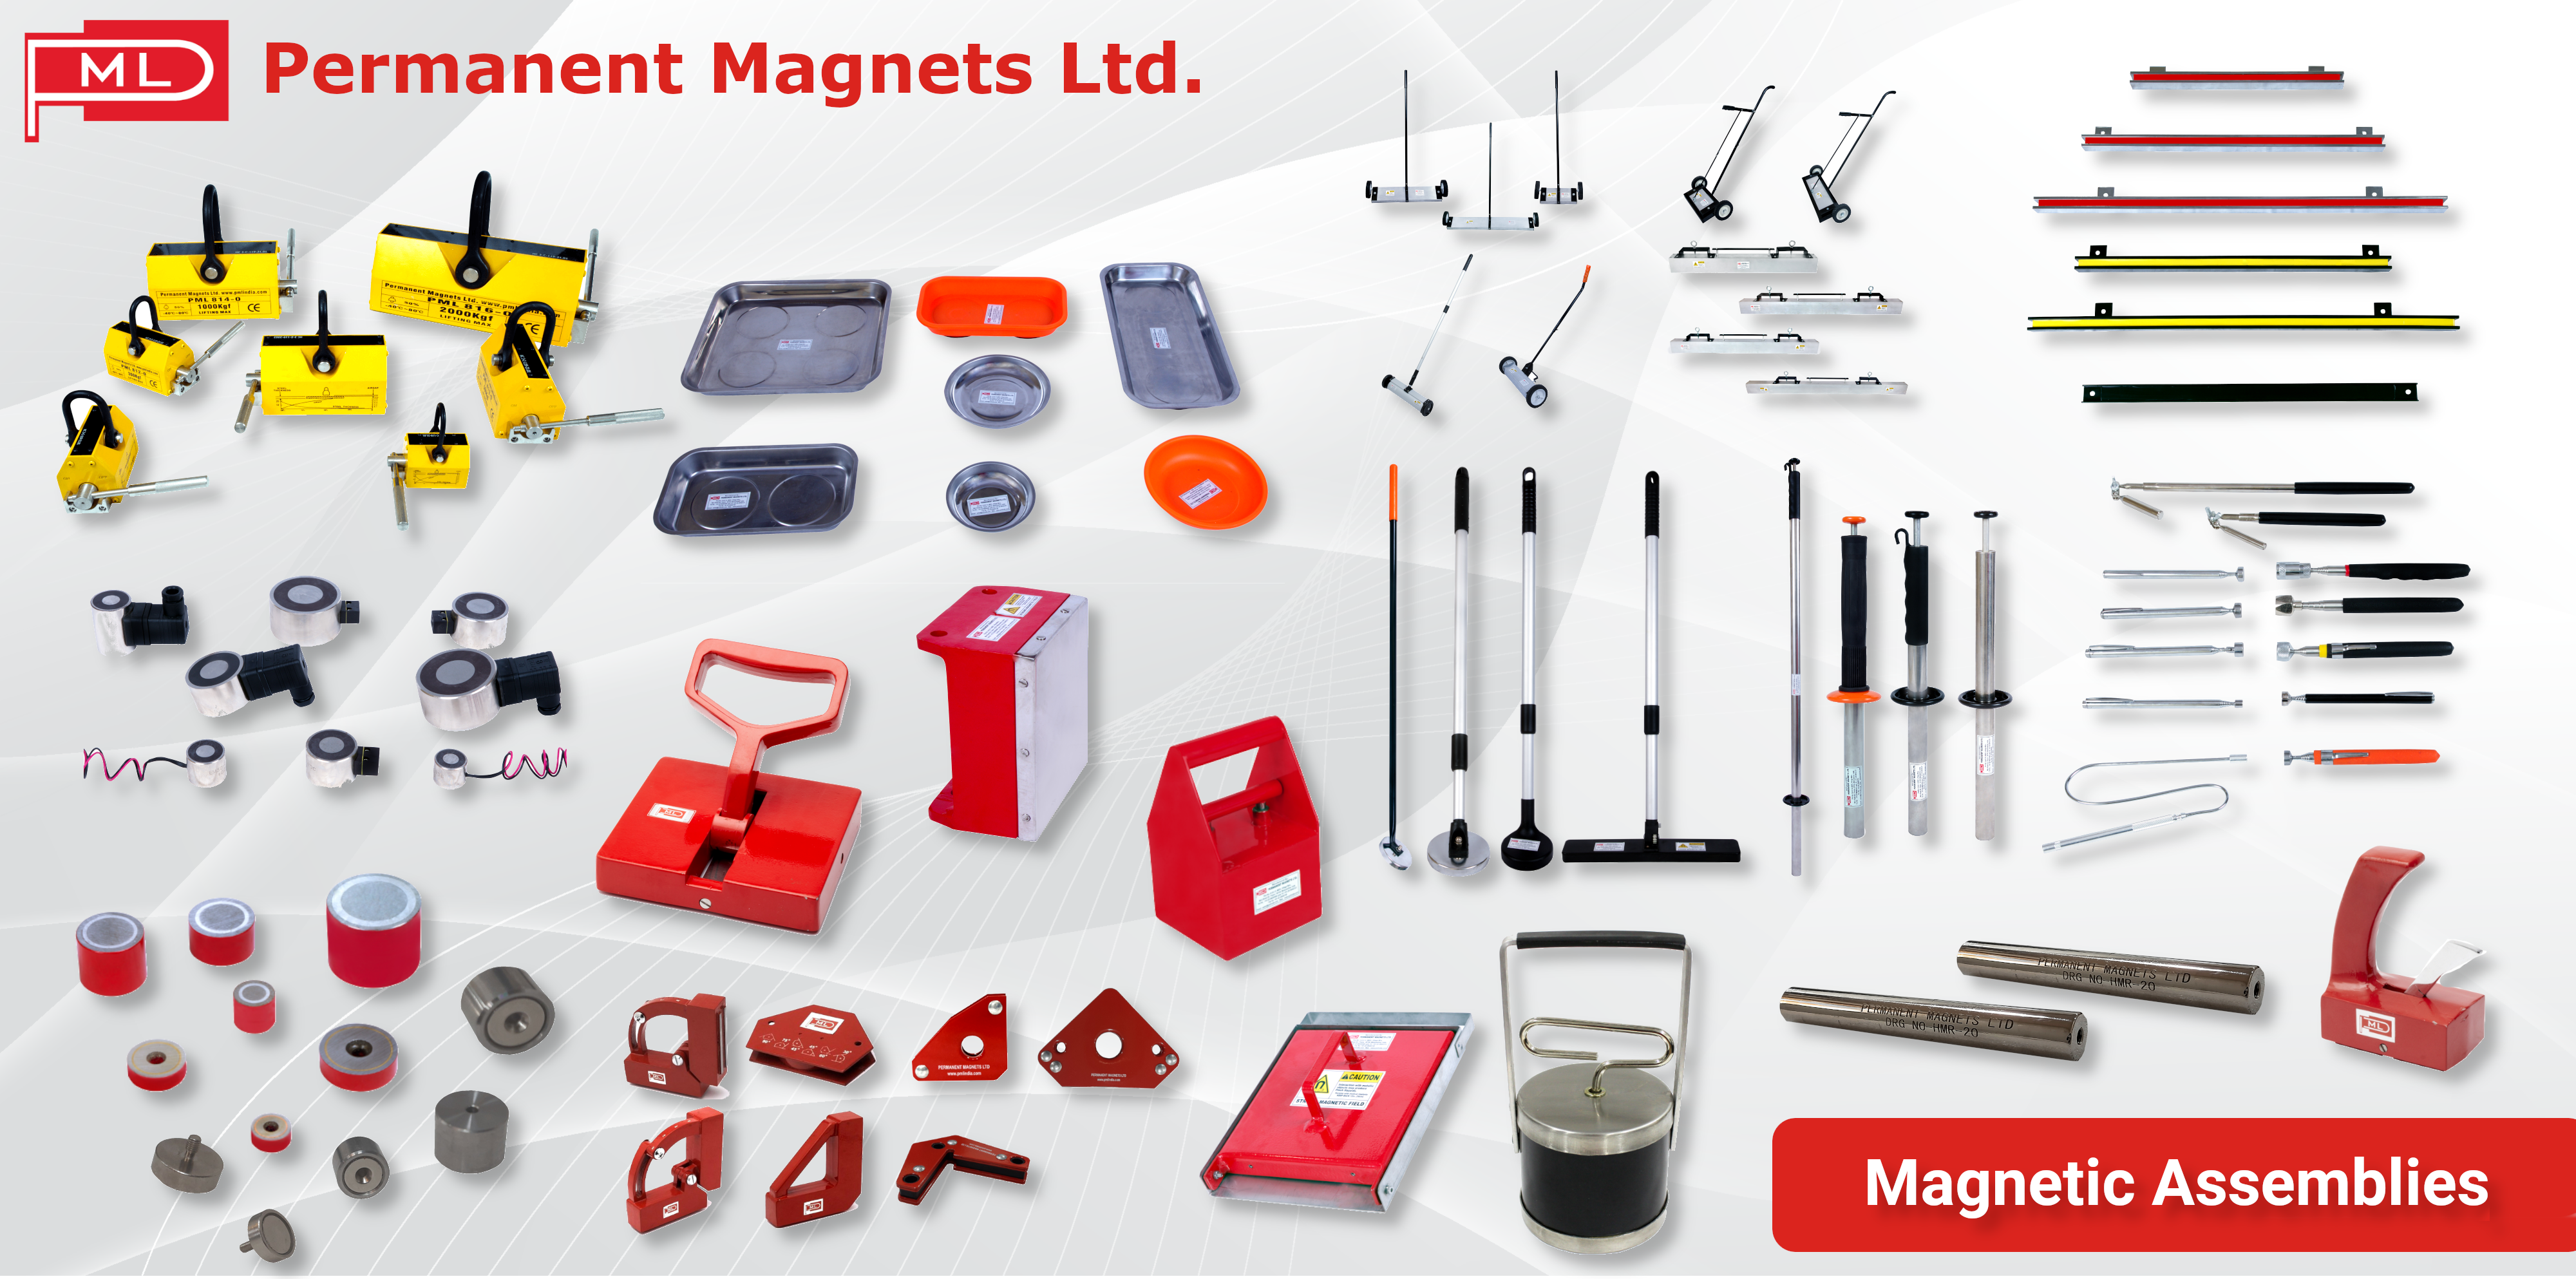 Magnetic Assemblies Subject to High Magnetic Field and Cost Reduction